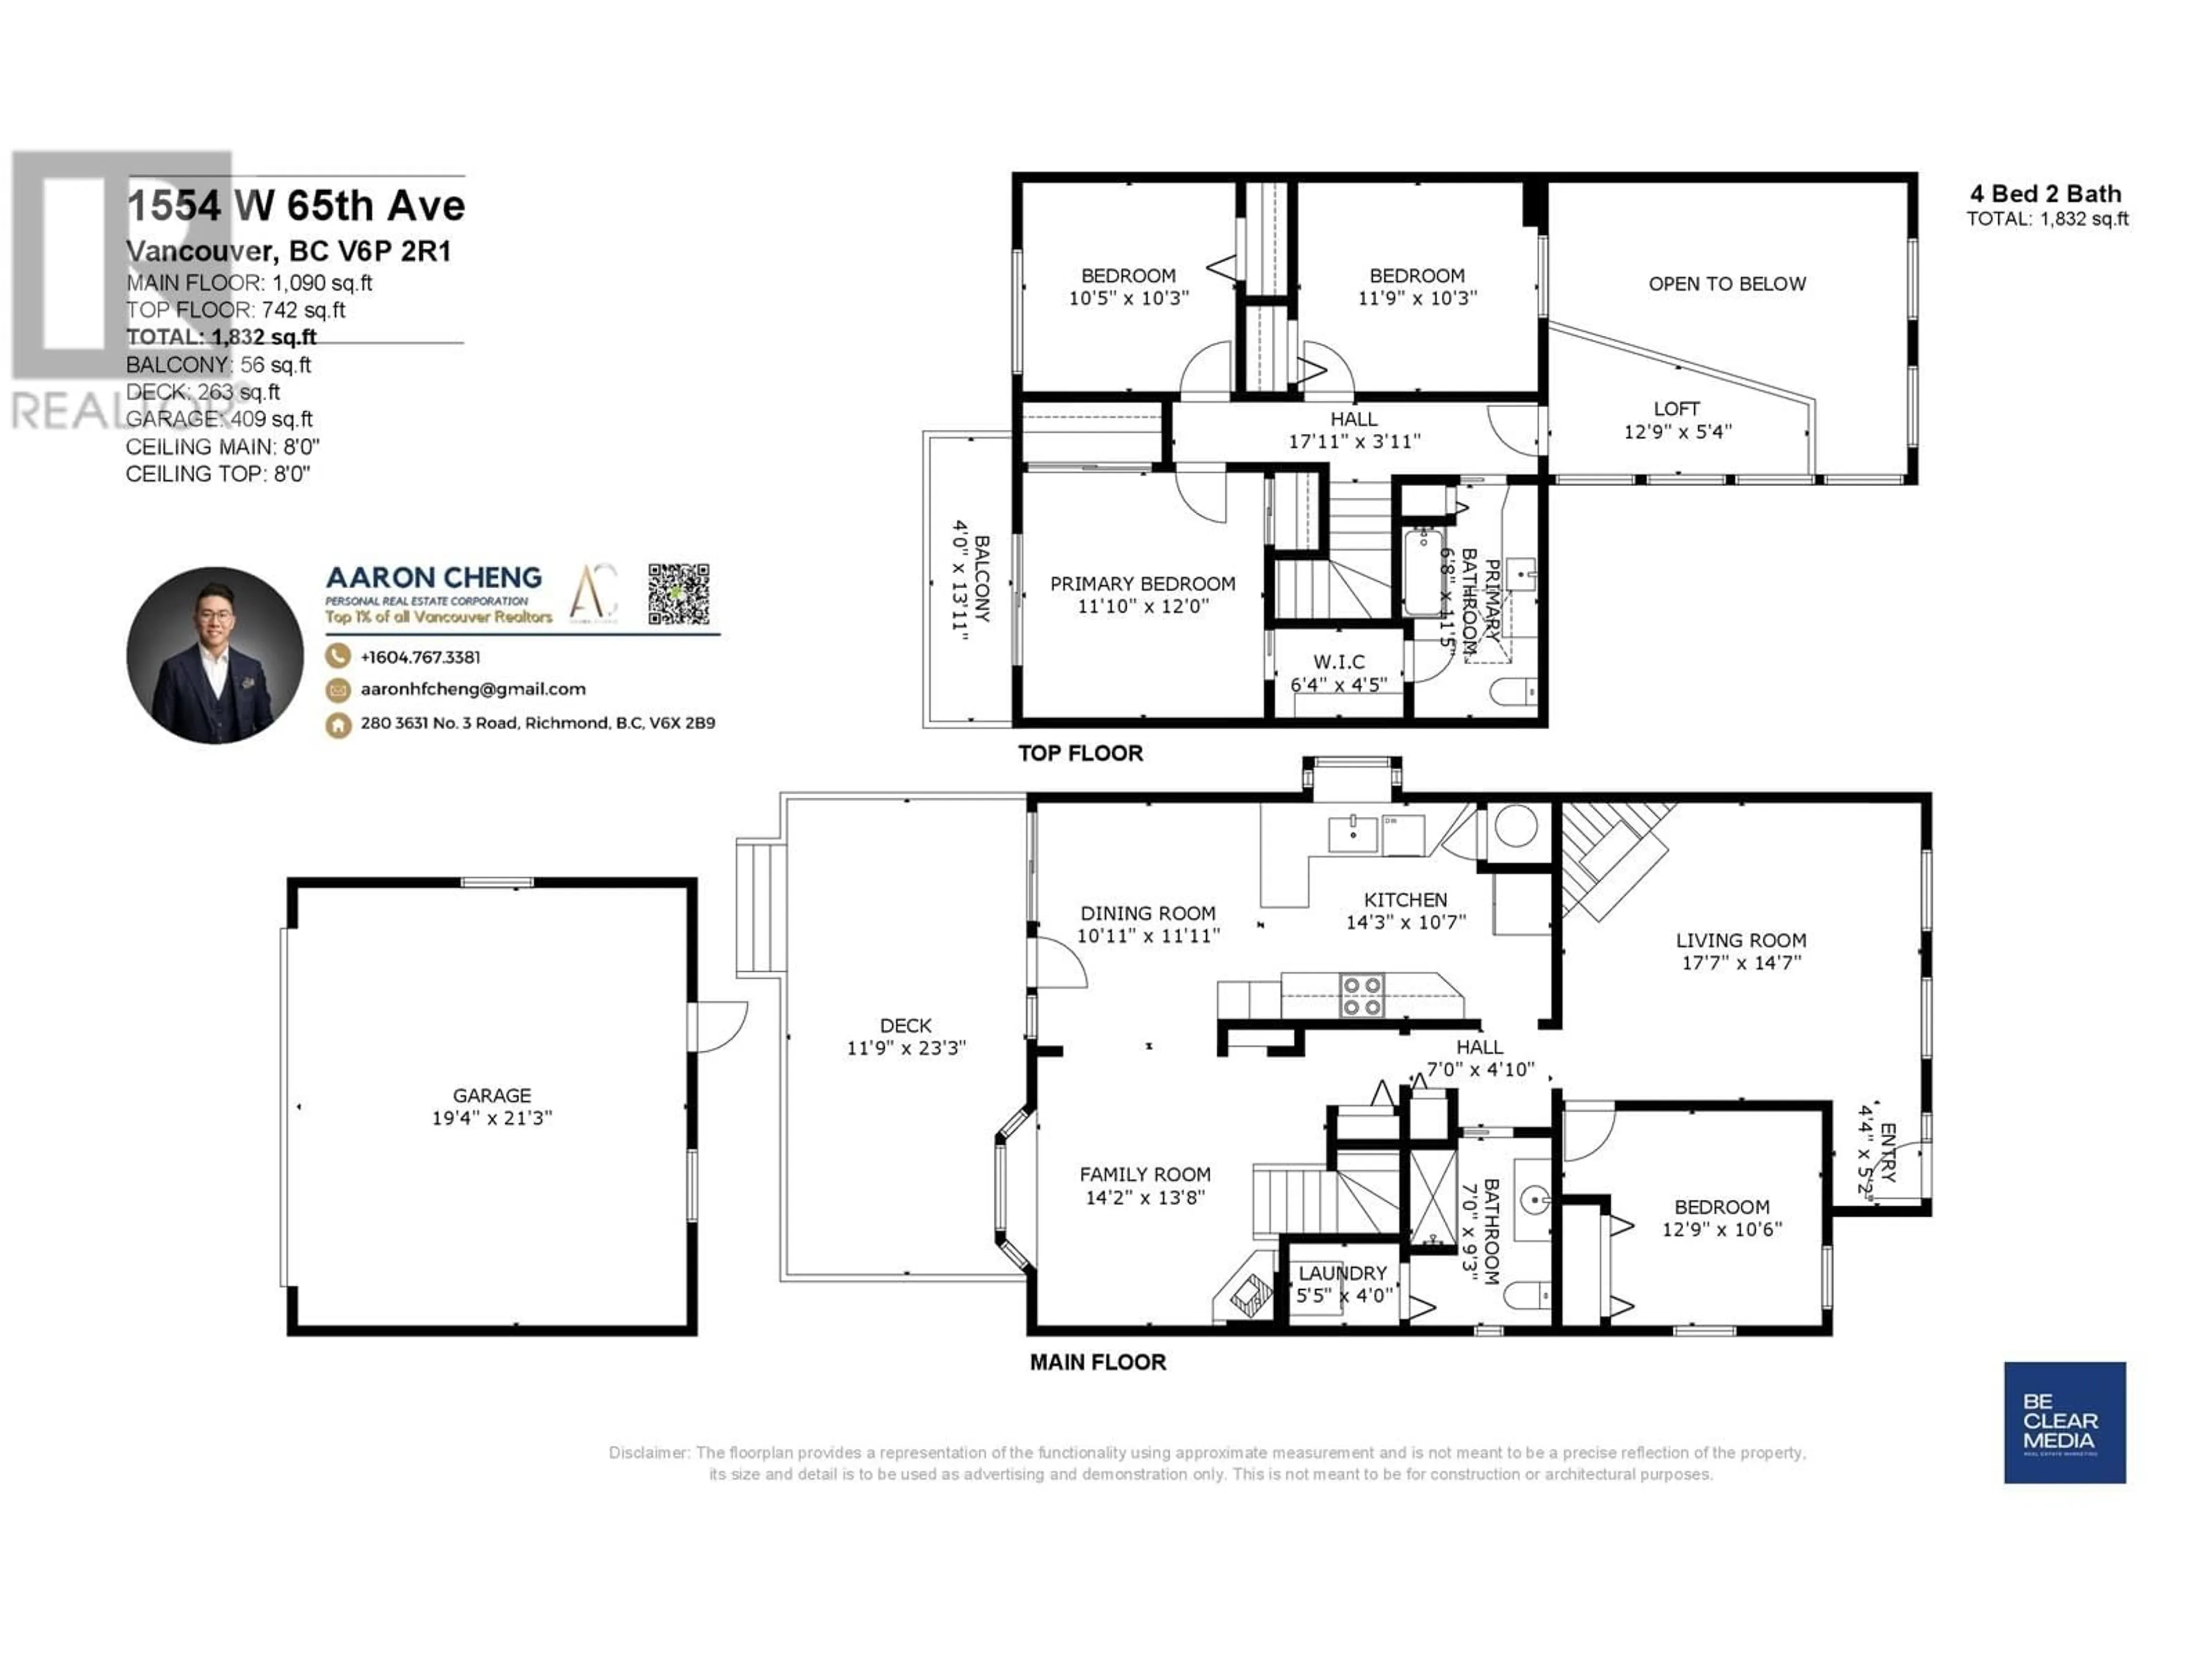 Floor plan for 1554 W 65TH AVENUE, Vancouver British Columbia V6P2R1